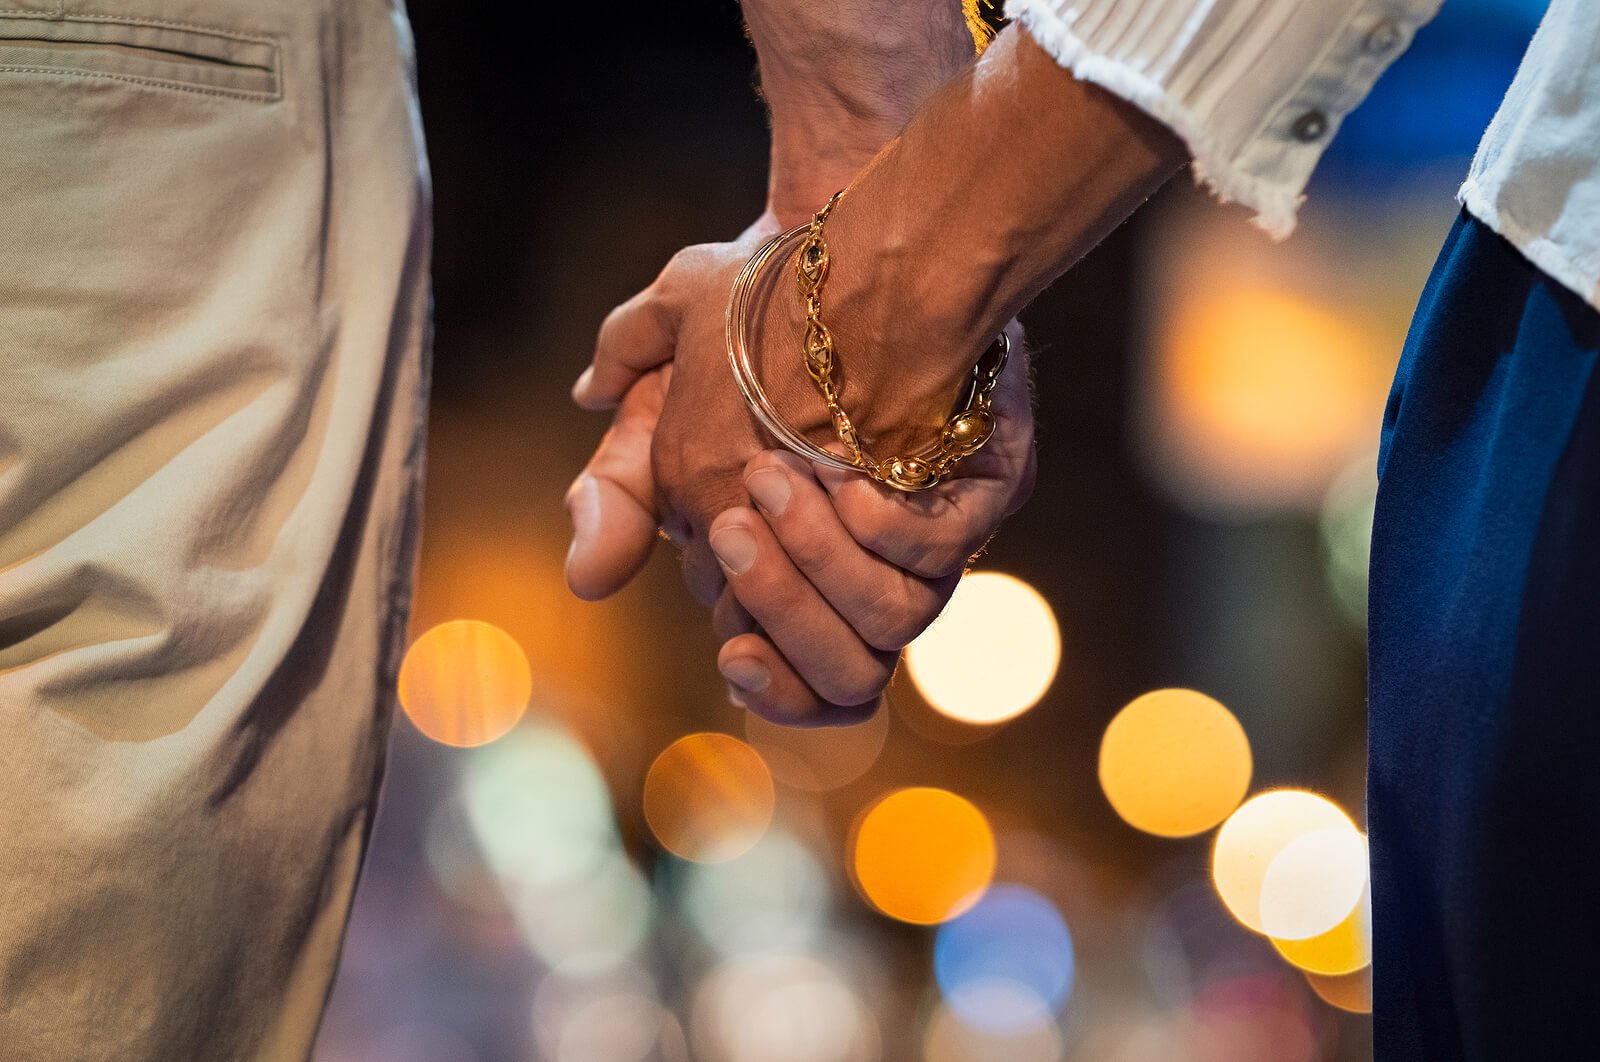 A close up of a couple holding hands against the city lights. Learn more about infidelity counseling in Roseville, CA and other services by searching infidelity therapist near me today. An infidelity counselor in Roseville, CA can offer support today